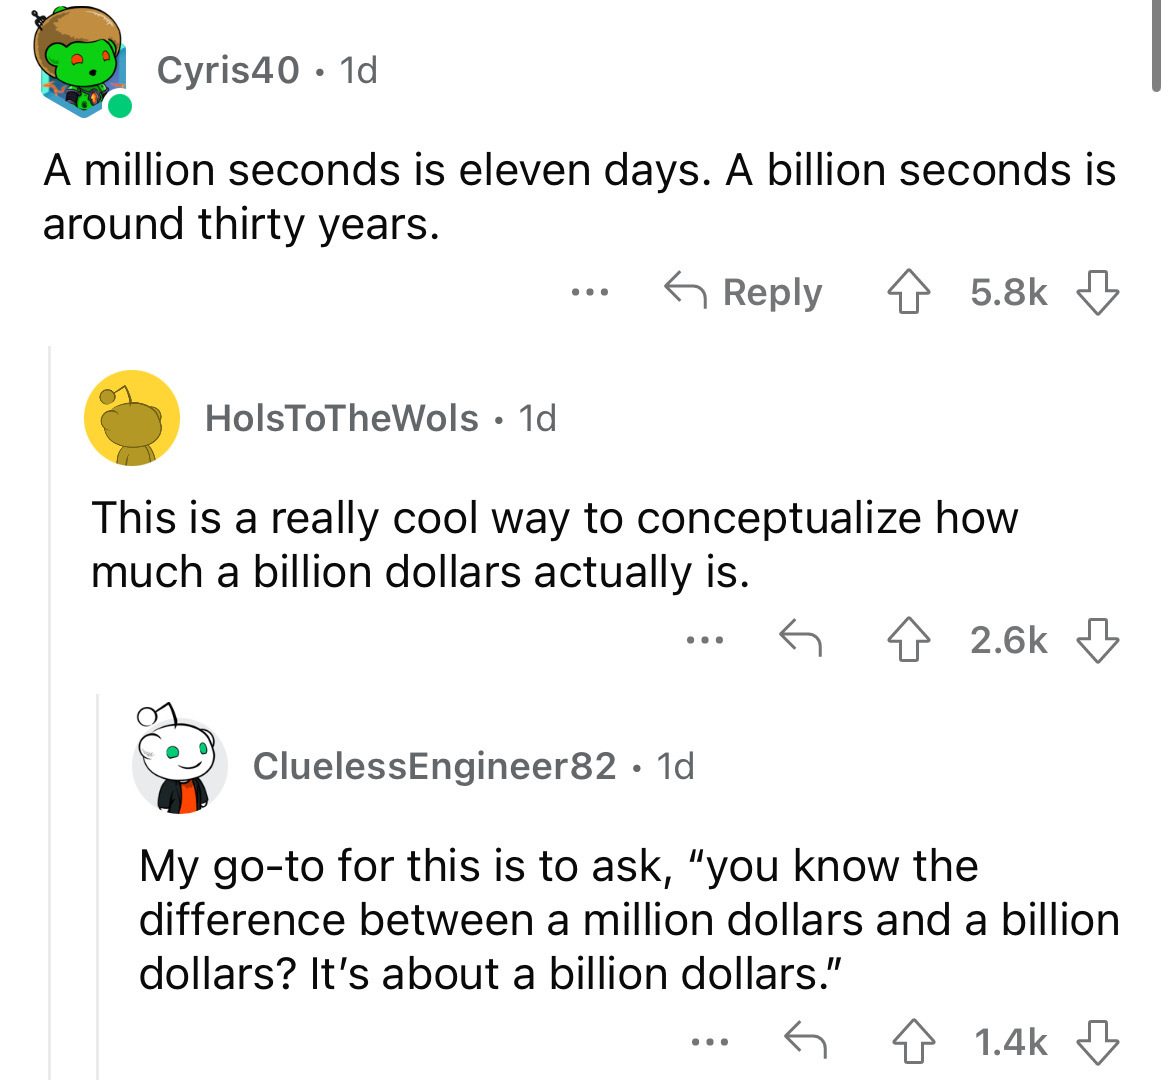 angle - Cyris40 1d A million seconds is eleven days. A billion seconds is around thirty years. 4 HolsToTheWols 1d ... This is a really cool way to conceptualize how much a billion dollars actually is. ... 4 Clueless Engineer82 1d My goto for this is to as